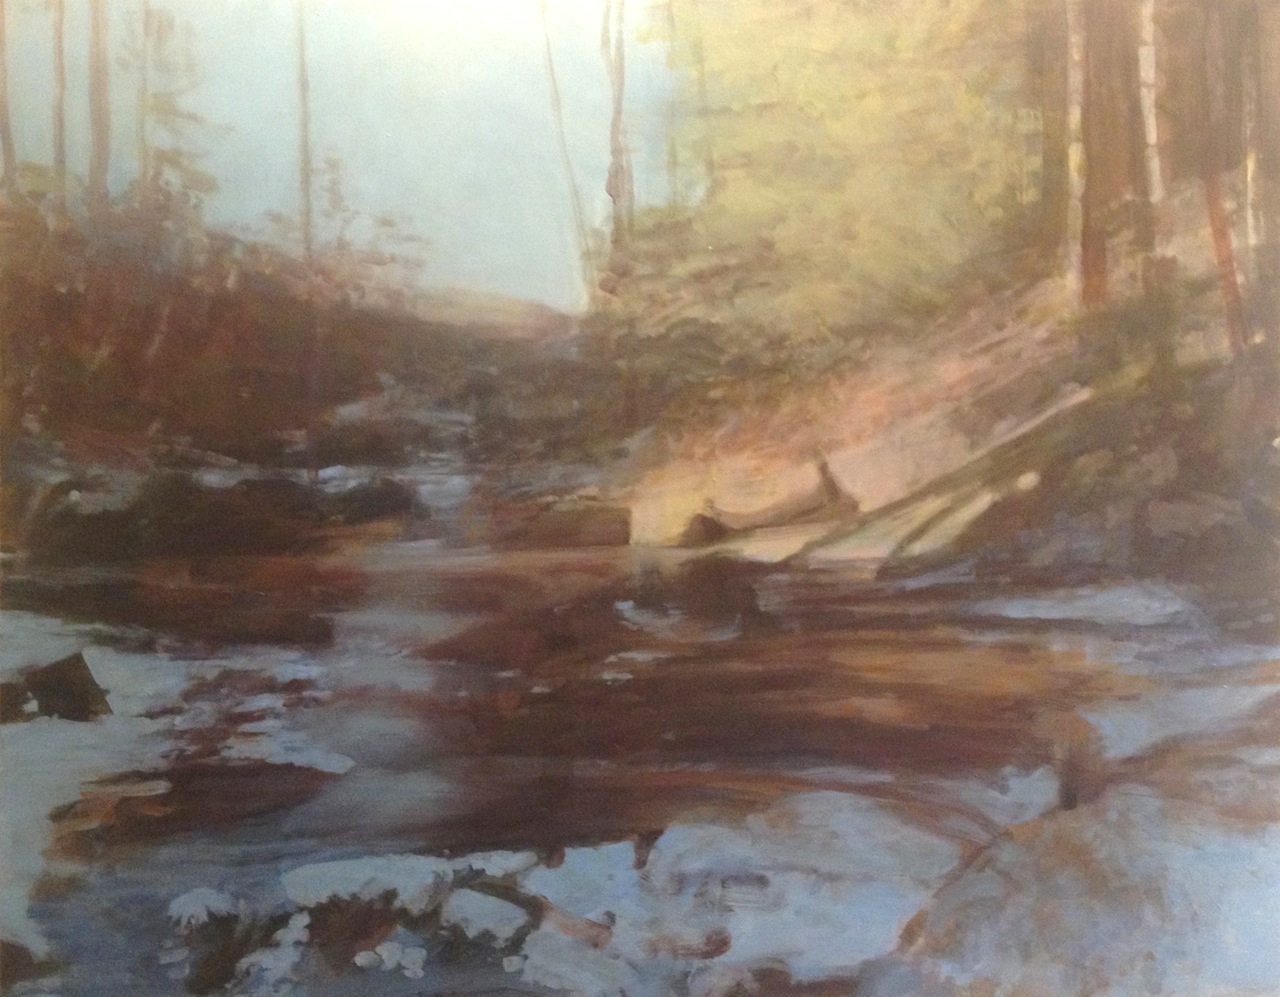 Moorman's River by Dean Dass
						at Les Yeux du Monde Art Gallery